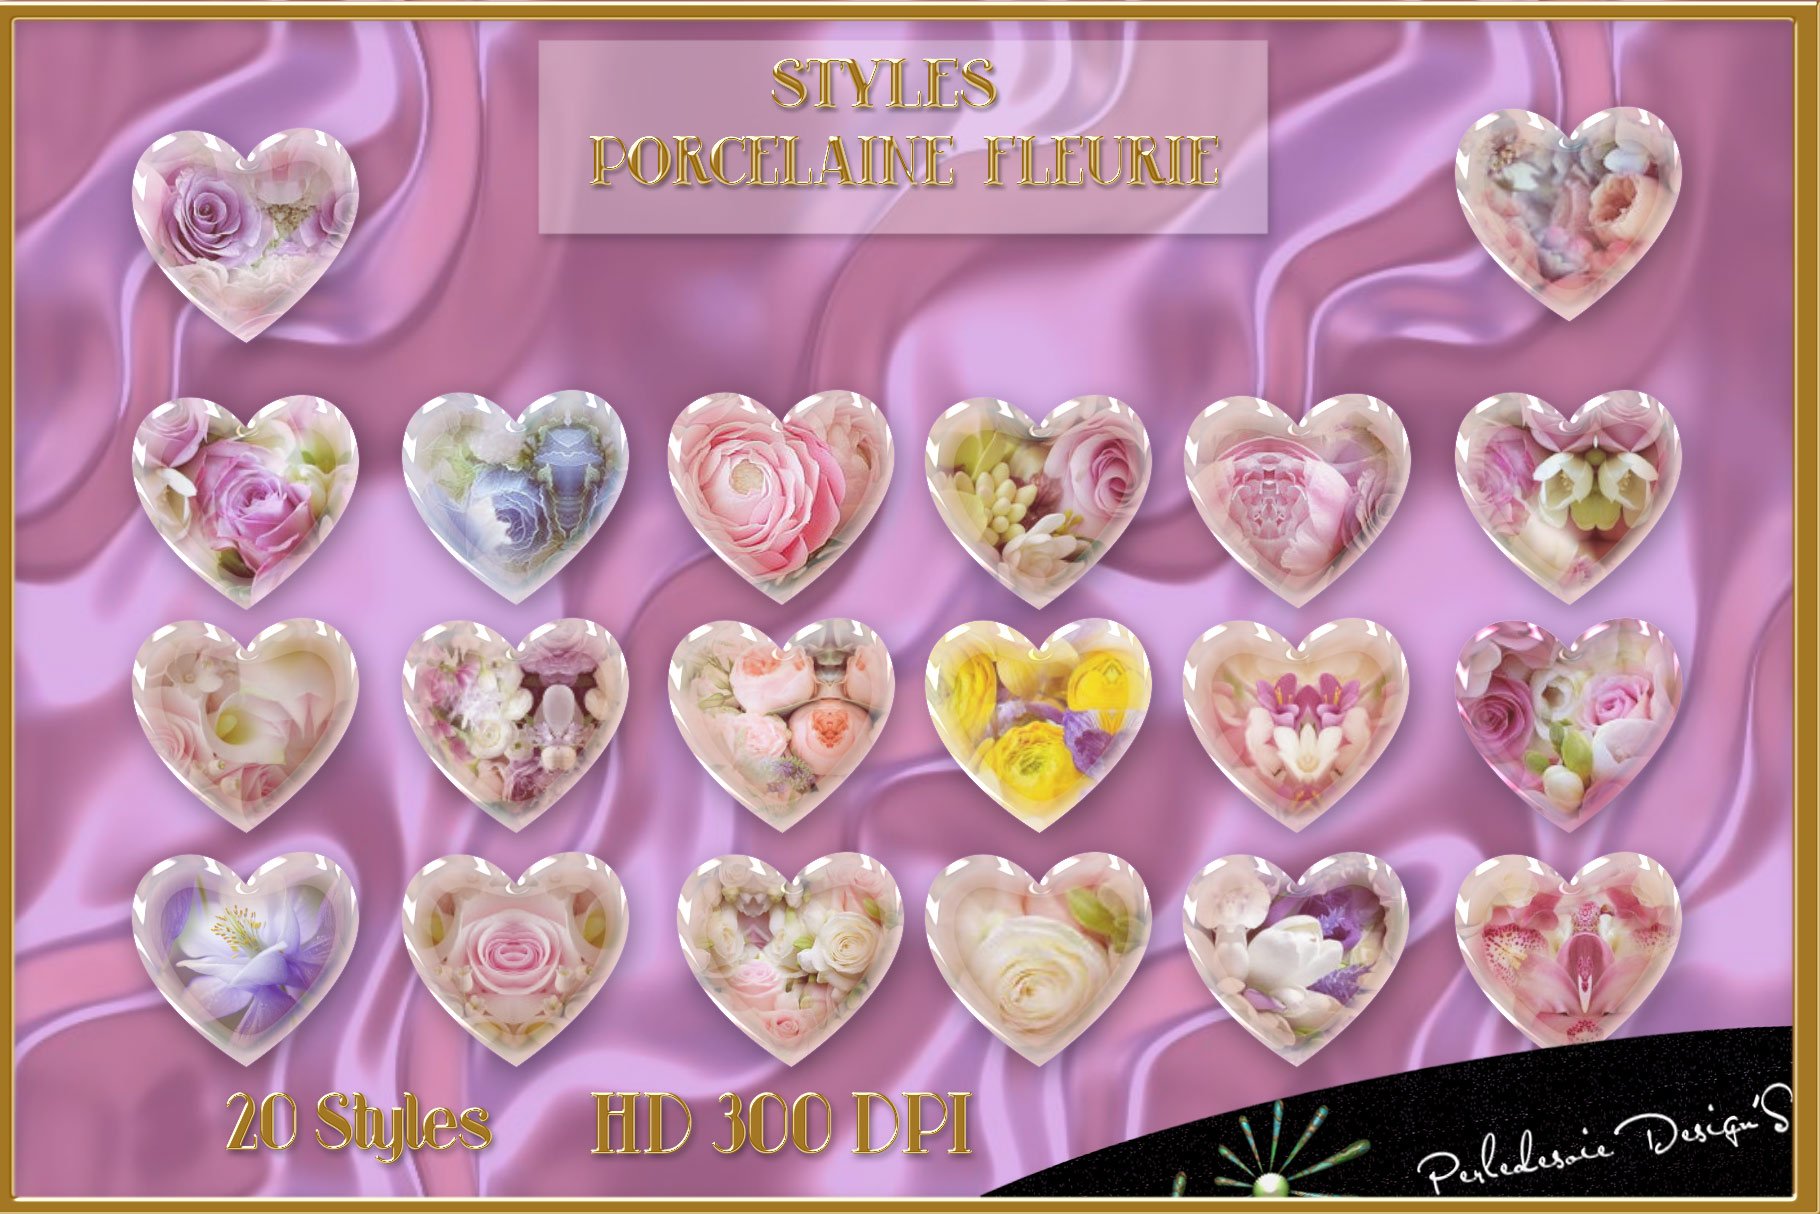 Styles Porcelaine Fleuriecover image.